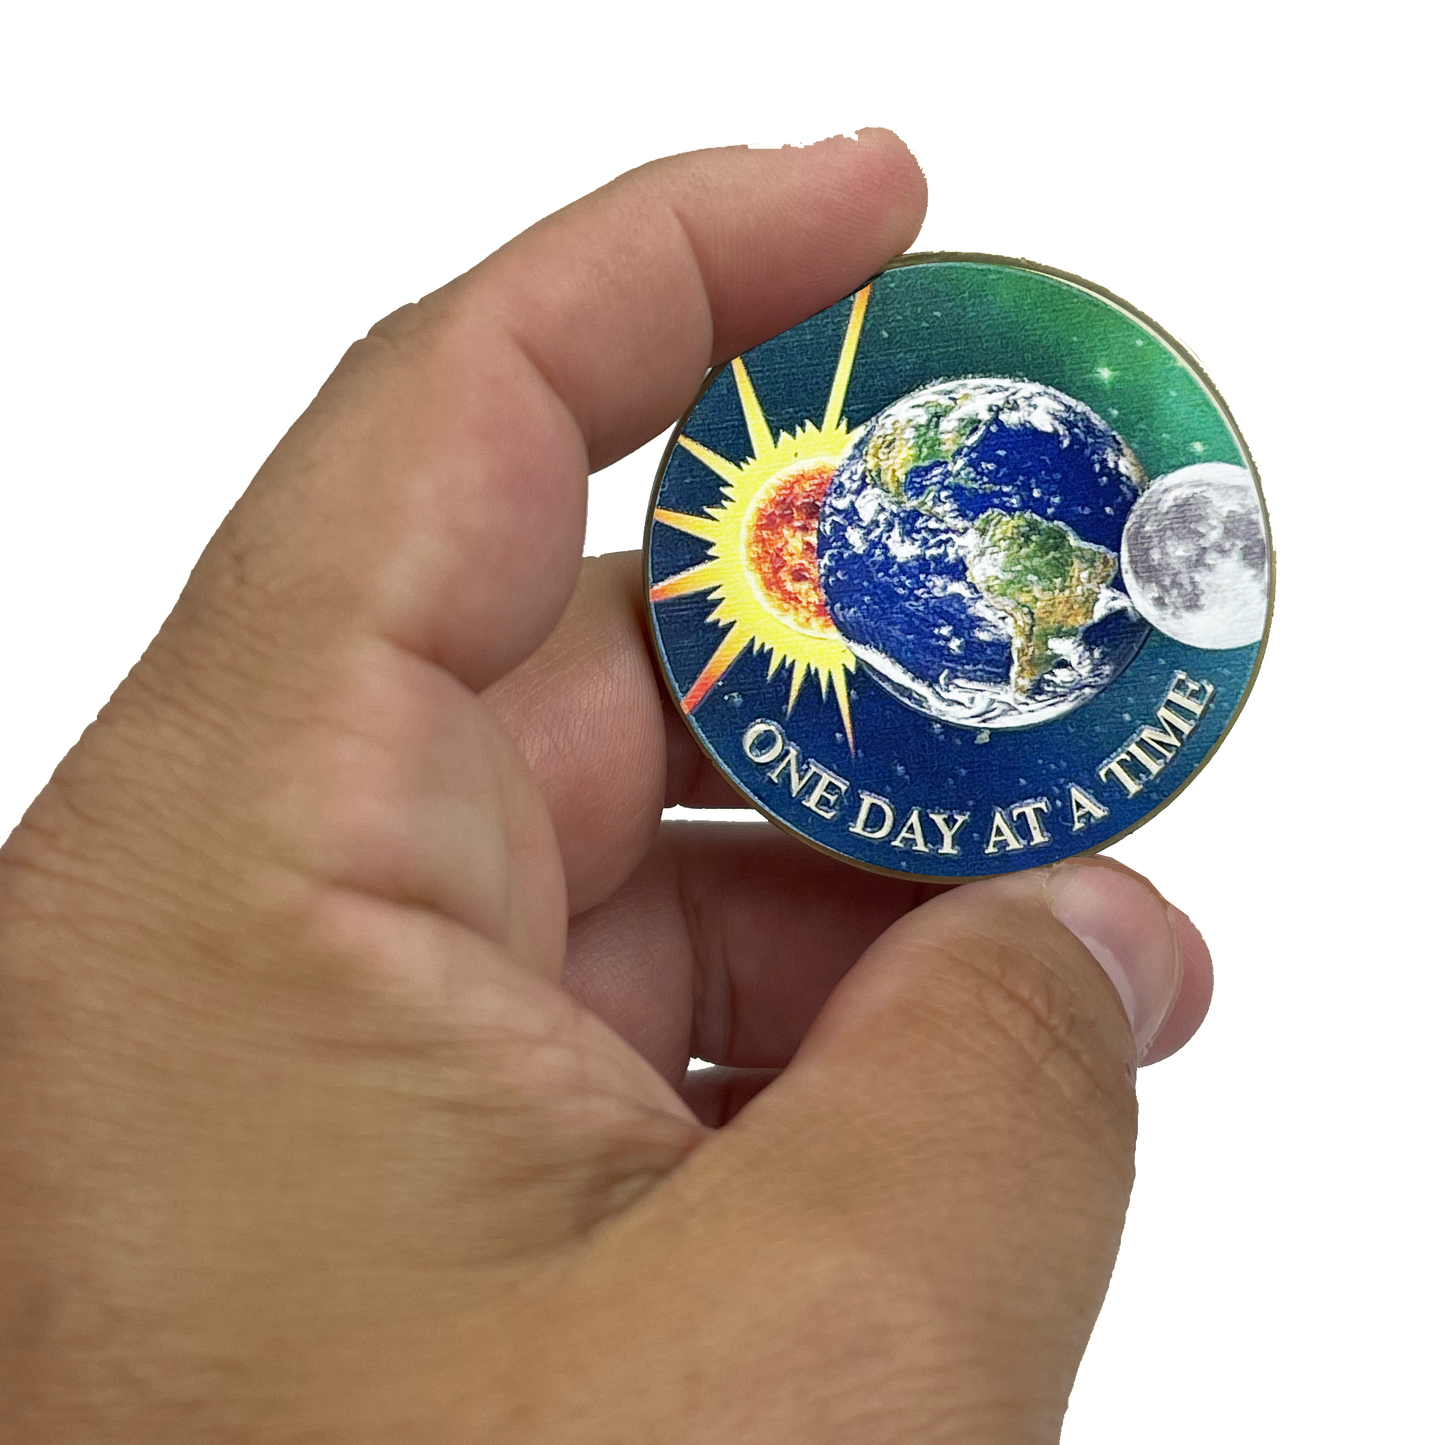 BL9-009 One Day at a Time Universe Sun Moon Earth Medallion Serenity Prayer Challenge Coin AA Chip Addiction